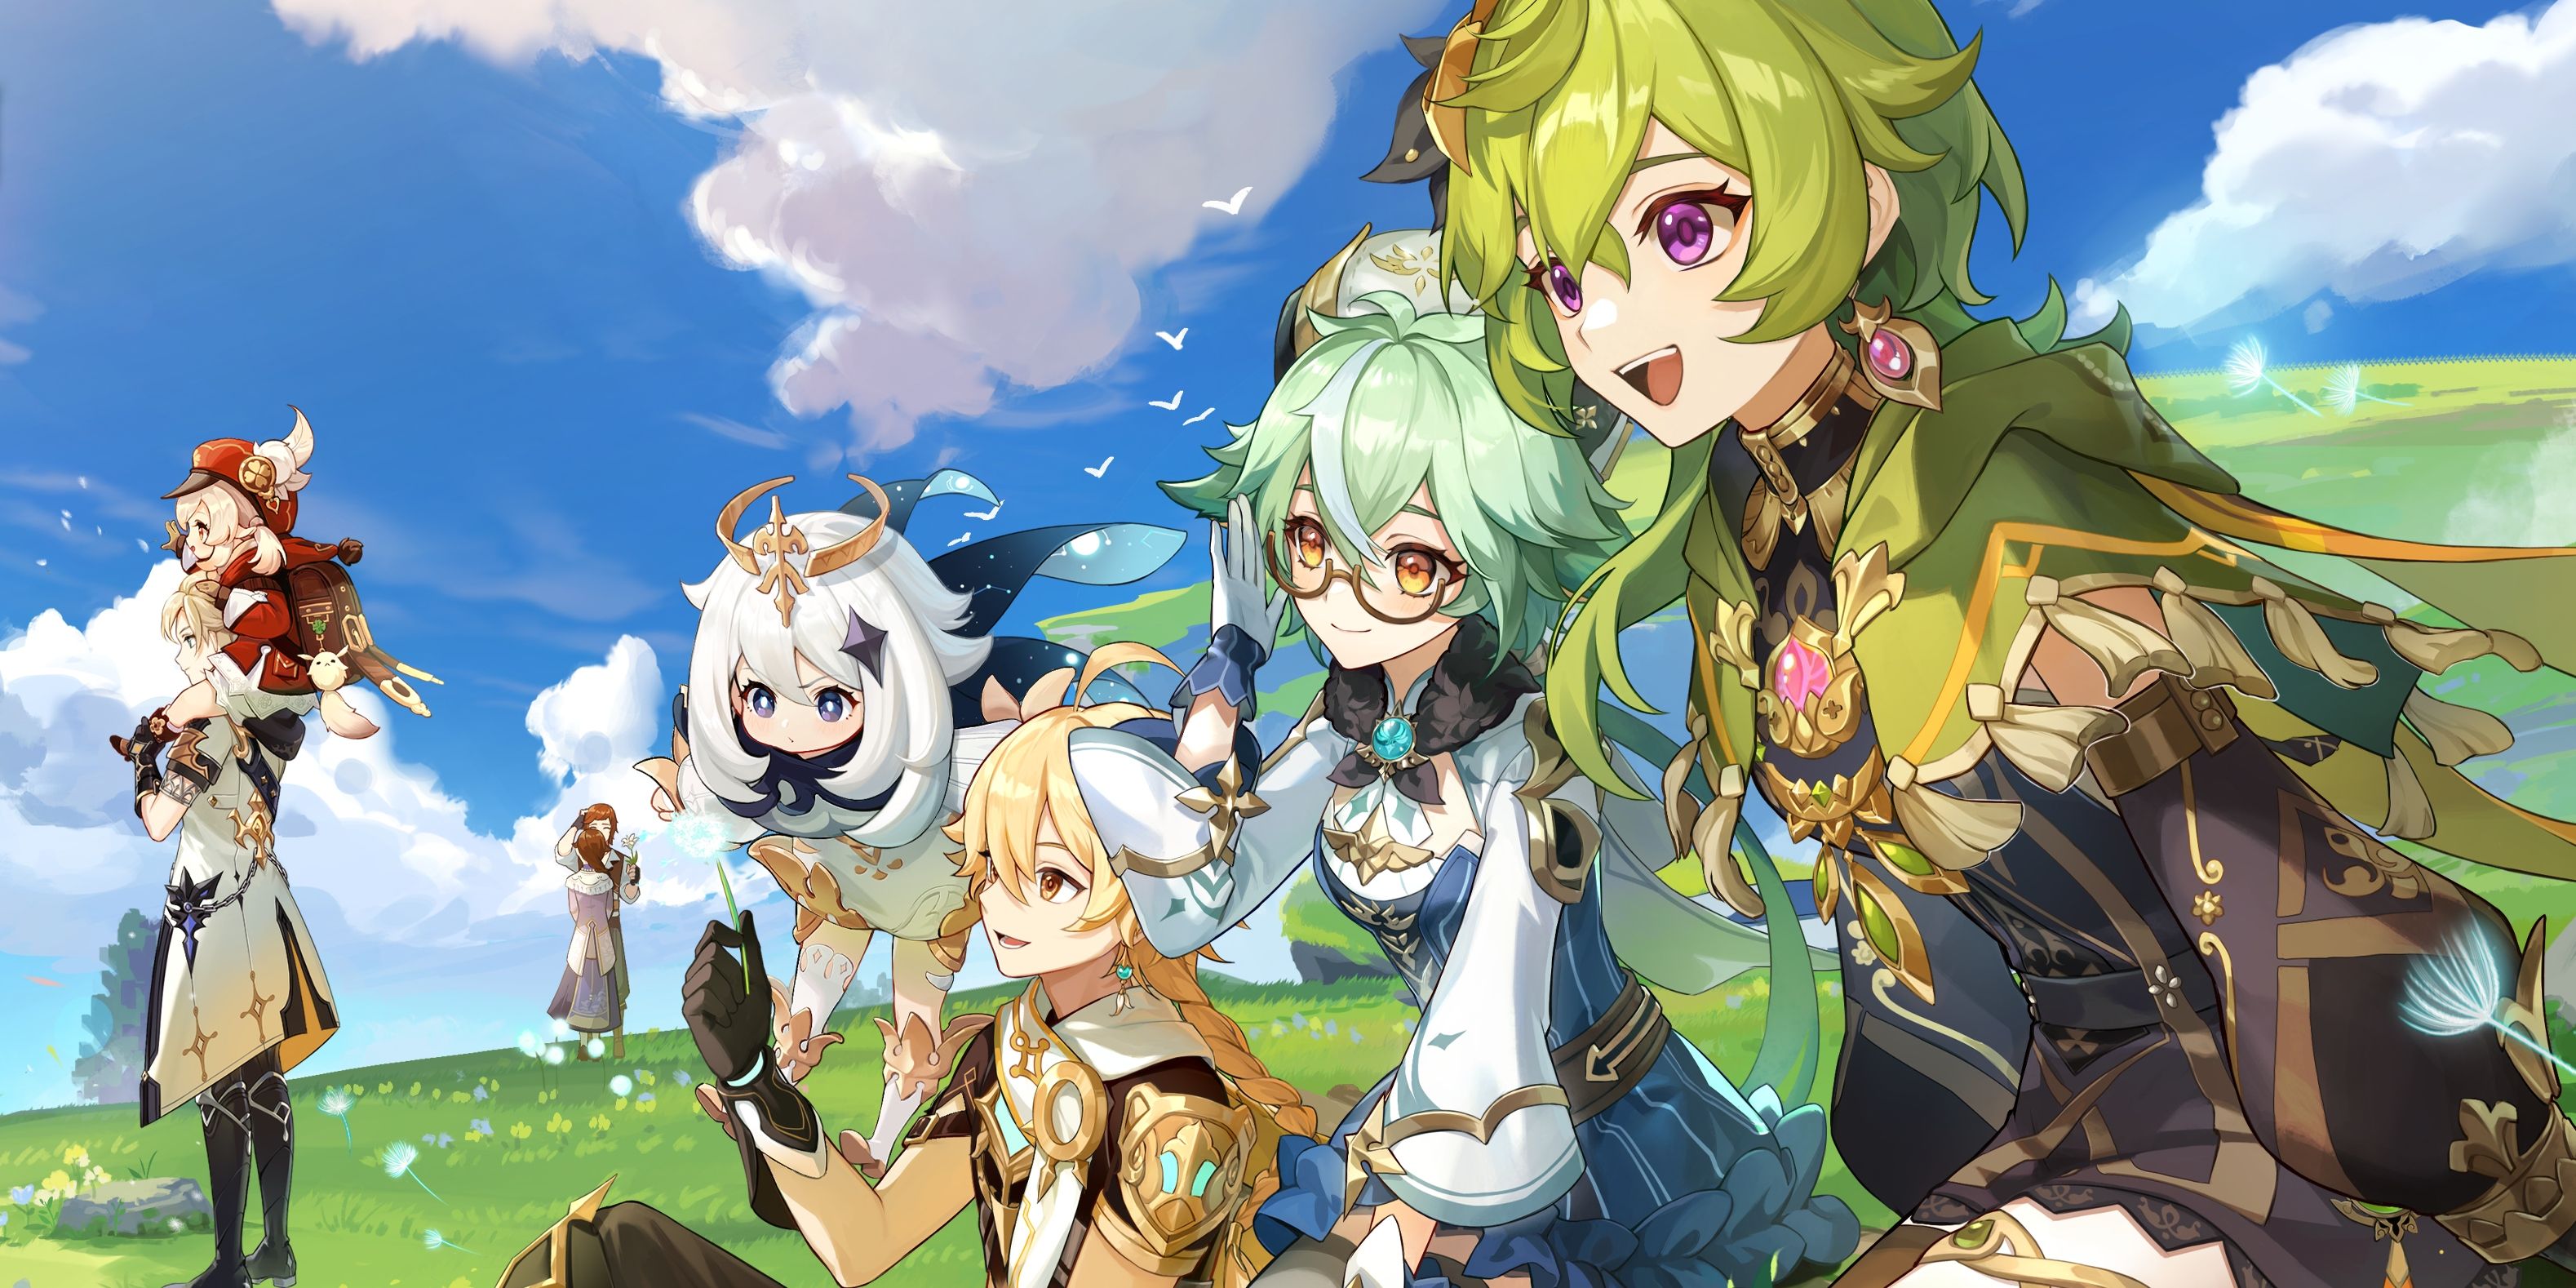 Genshin Impact 3.5's key art, showing Collei, Sucrose, Aether, and Paimon sitting on a Mondstadt field under a clear sky.  In the distance is Albedo with Klee sitting on his shoulders and further away is Timaeus and his love interest.